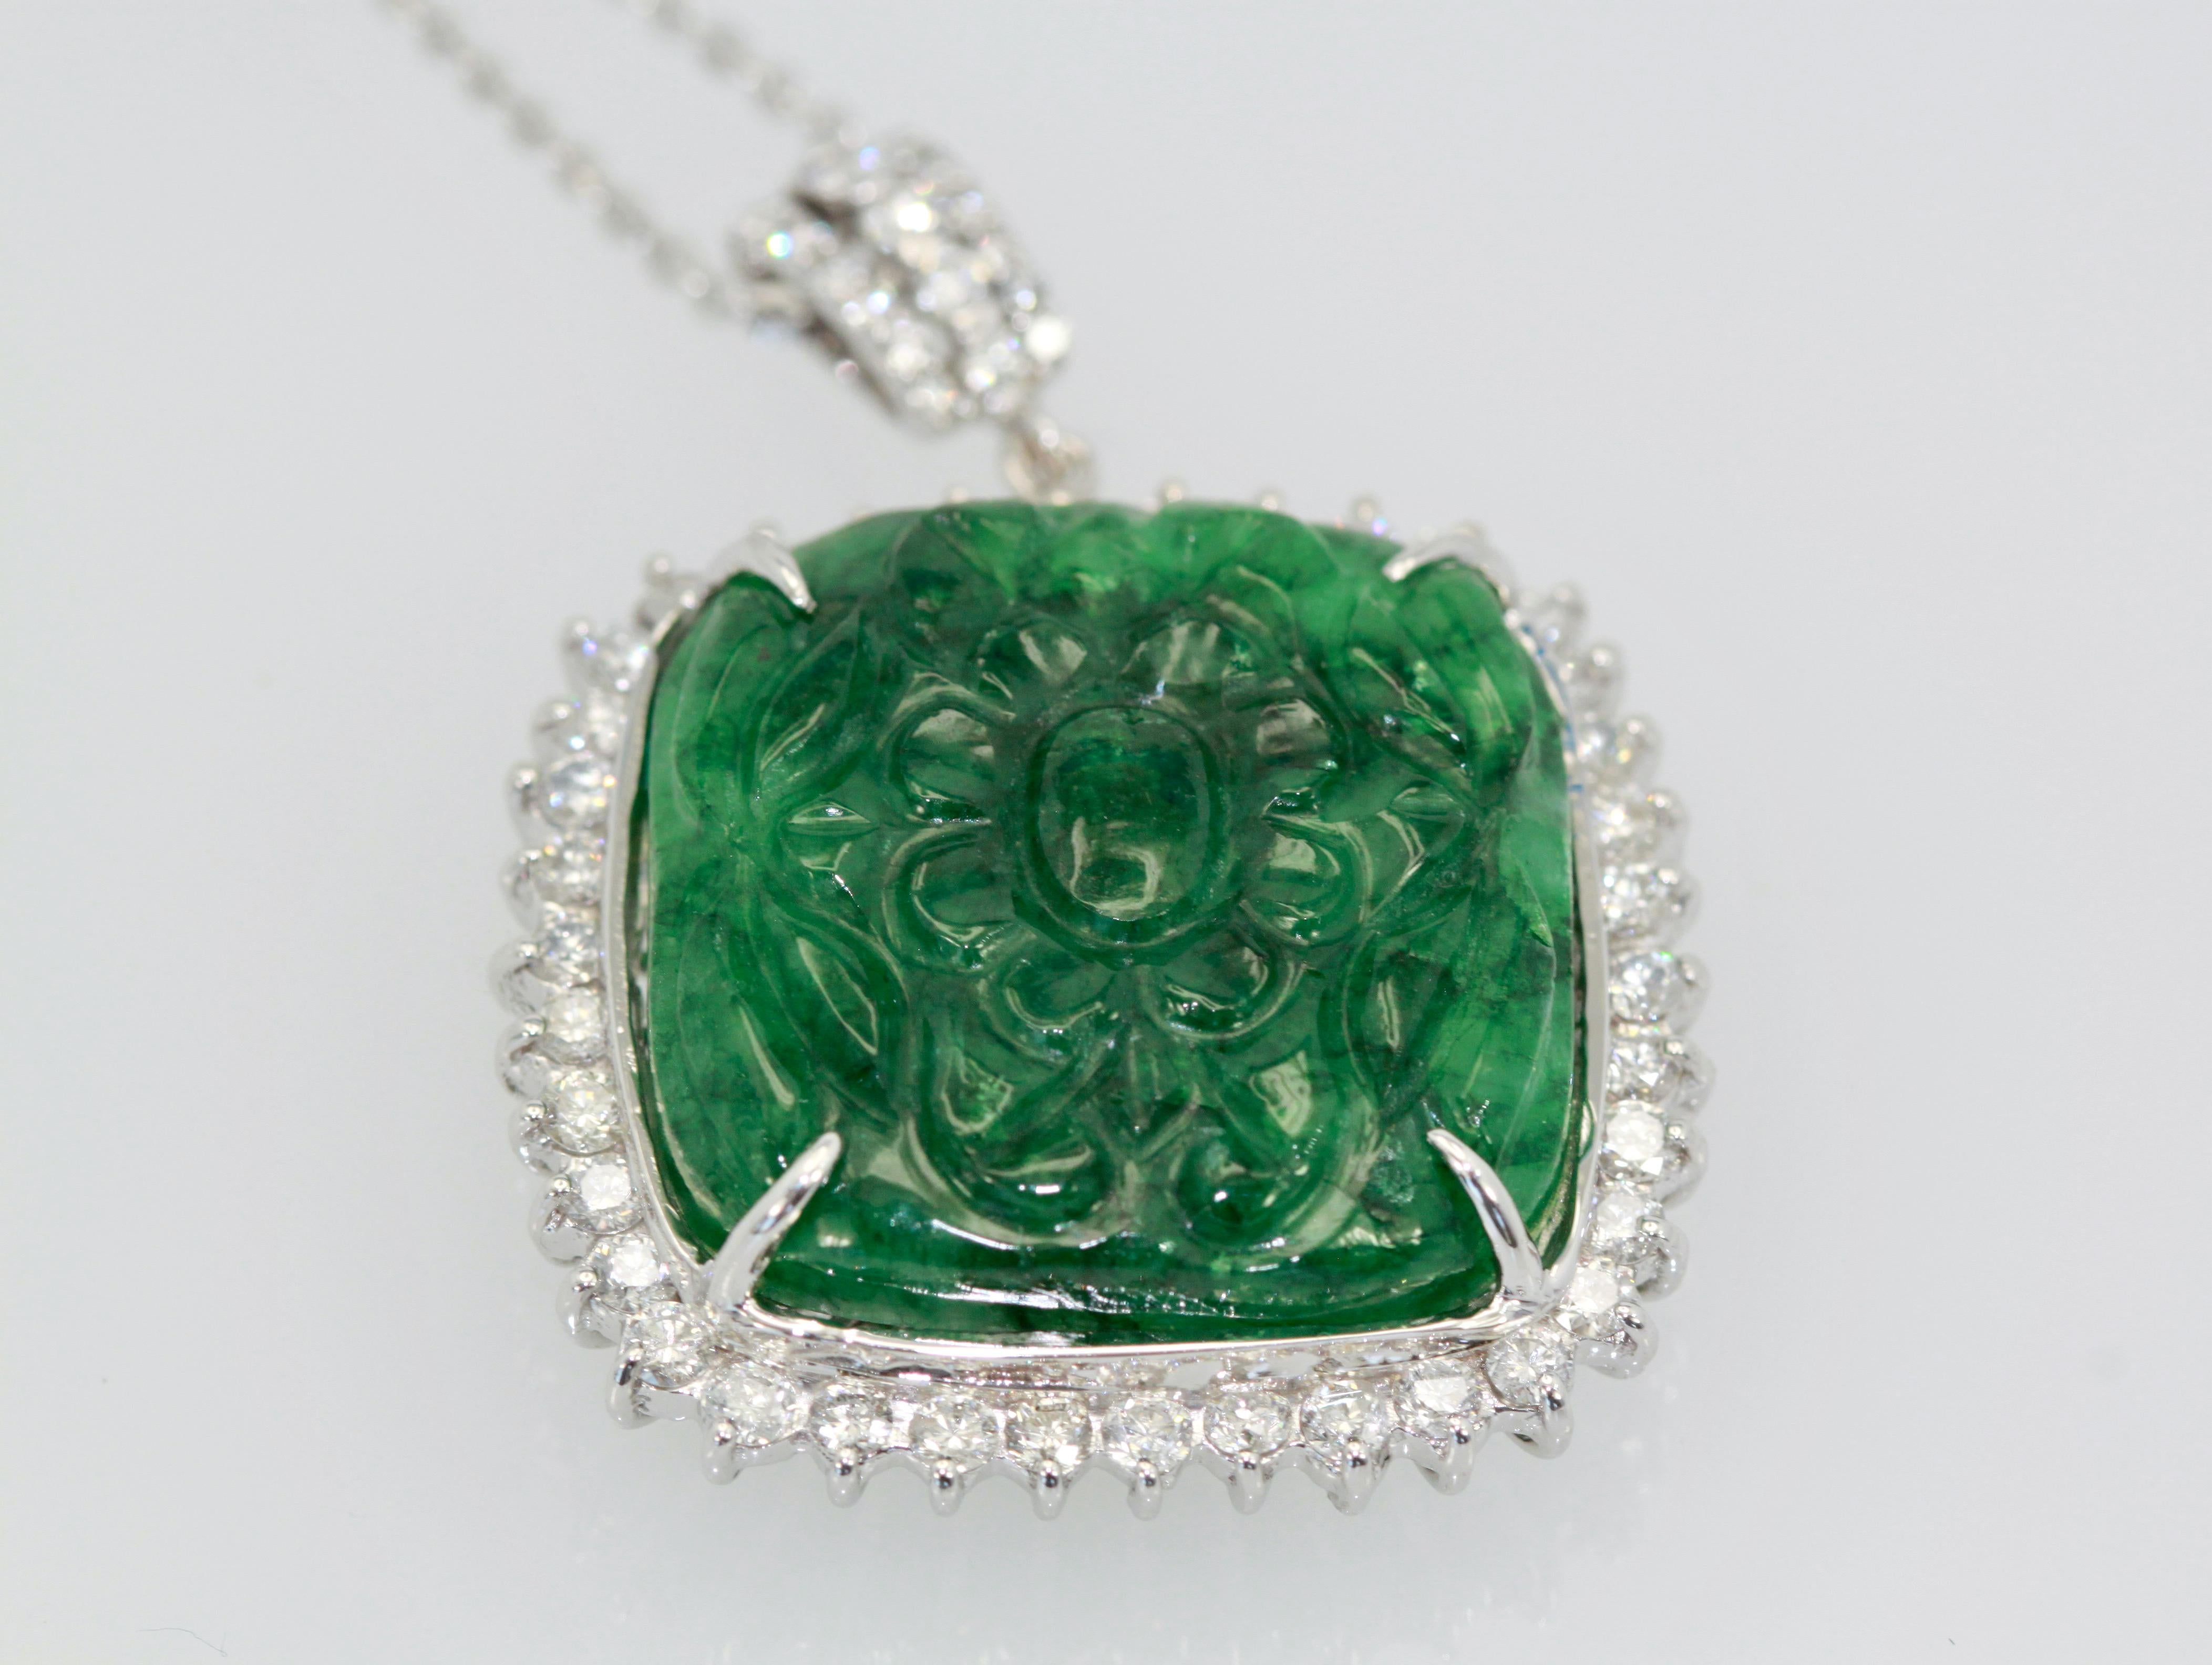 This gorgeous Emerald has a beautiful carved face of what seem to be flowers and is somewhat transparent.  The stone is 22.15 x 21.19 mm and weighs 16.9 grams.  It has a Diamond surround of round brilliant Diamonds G color and vs clarity which